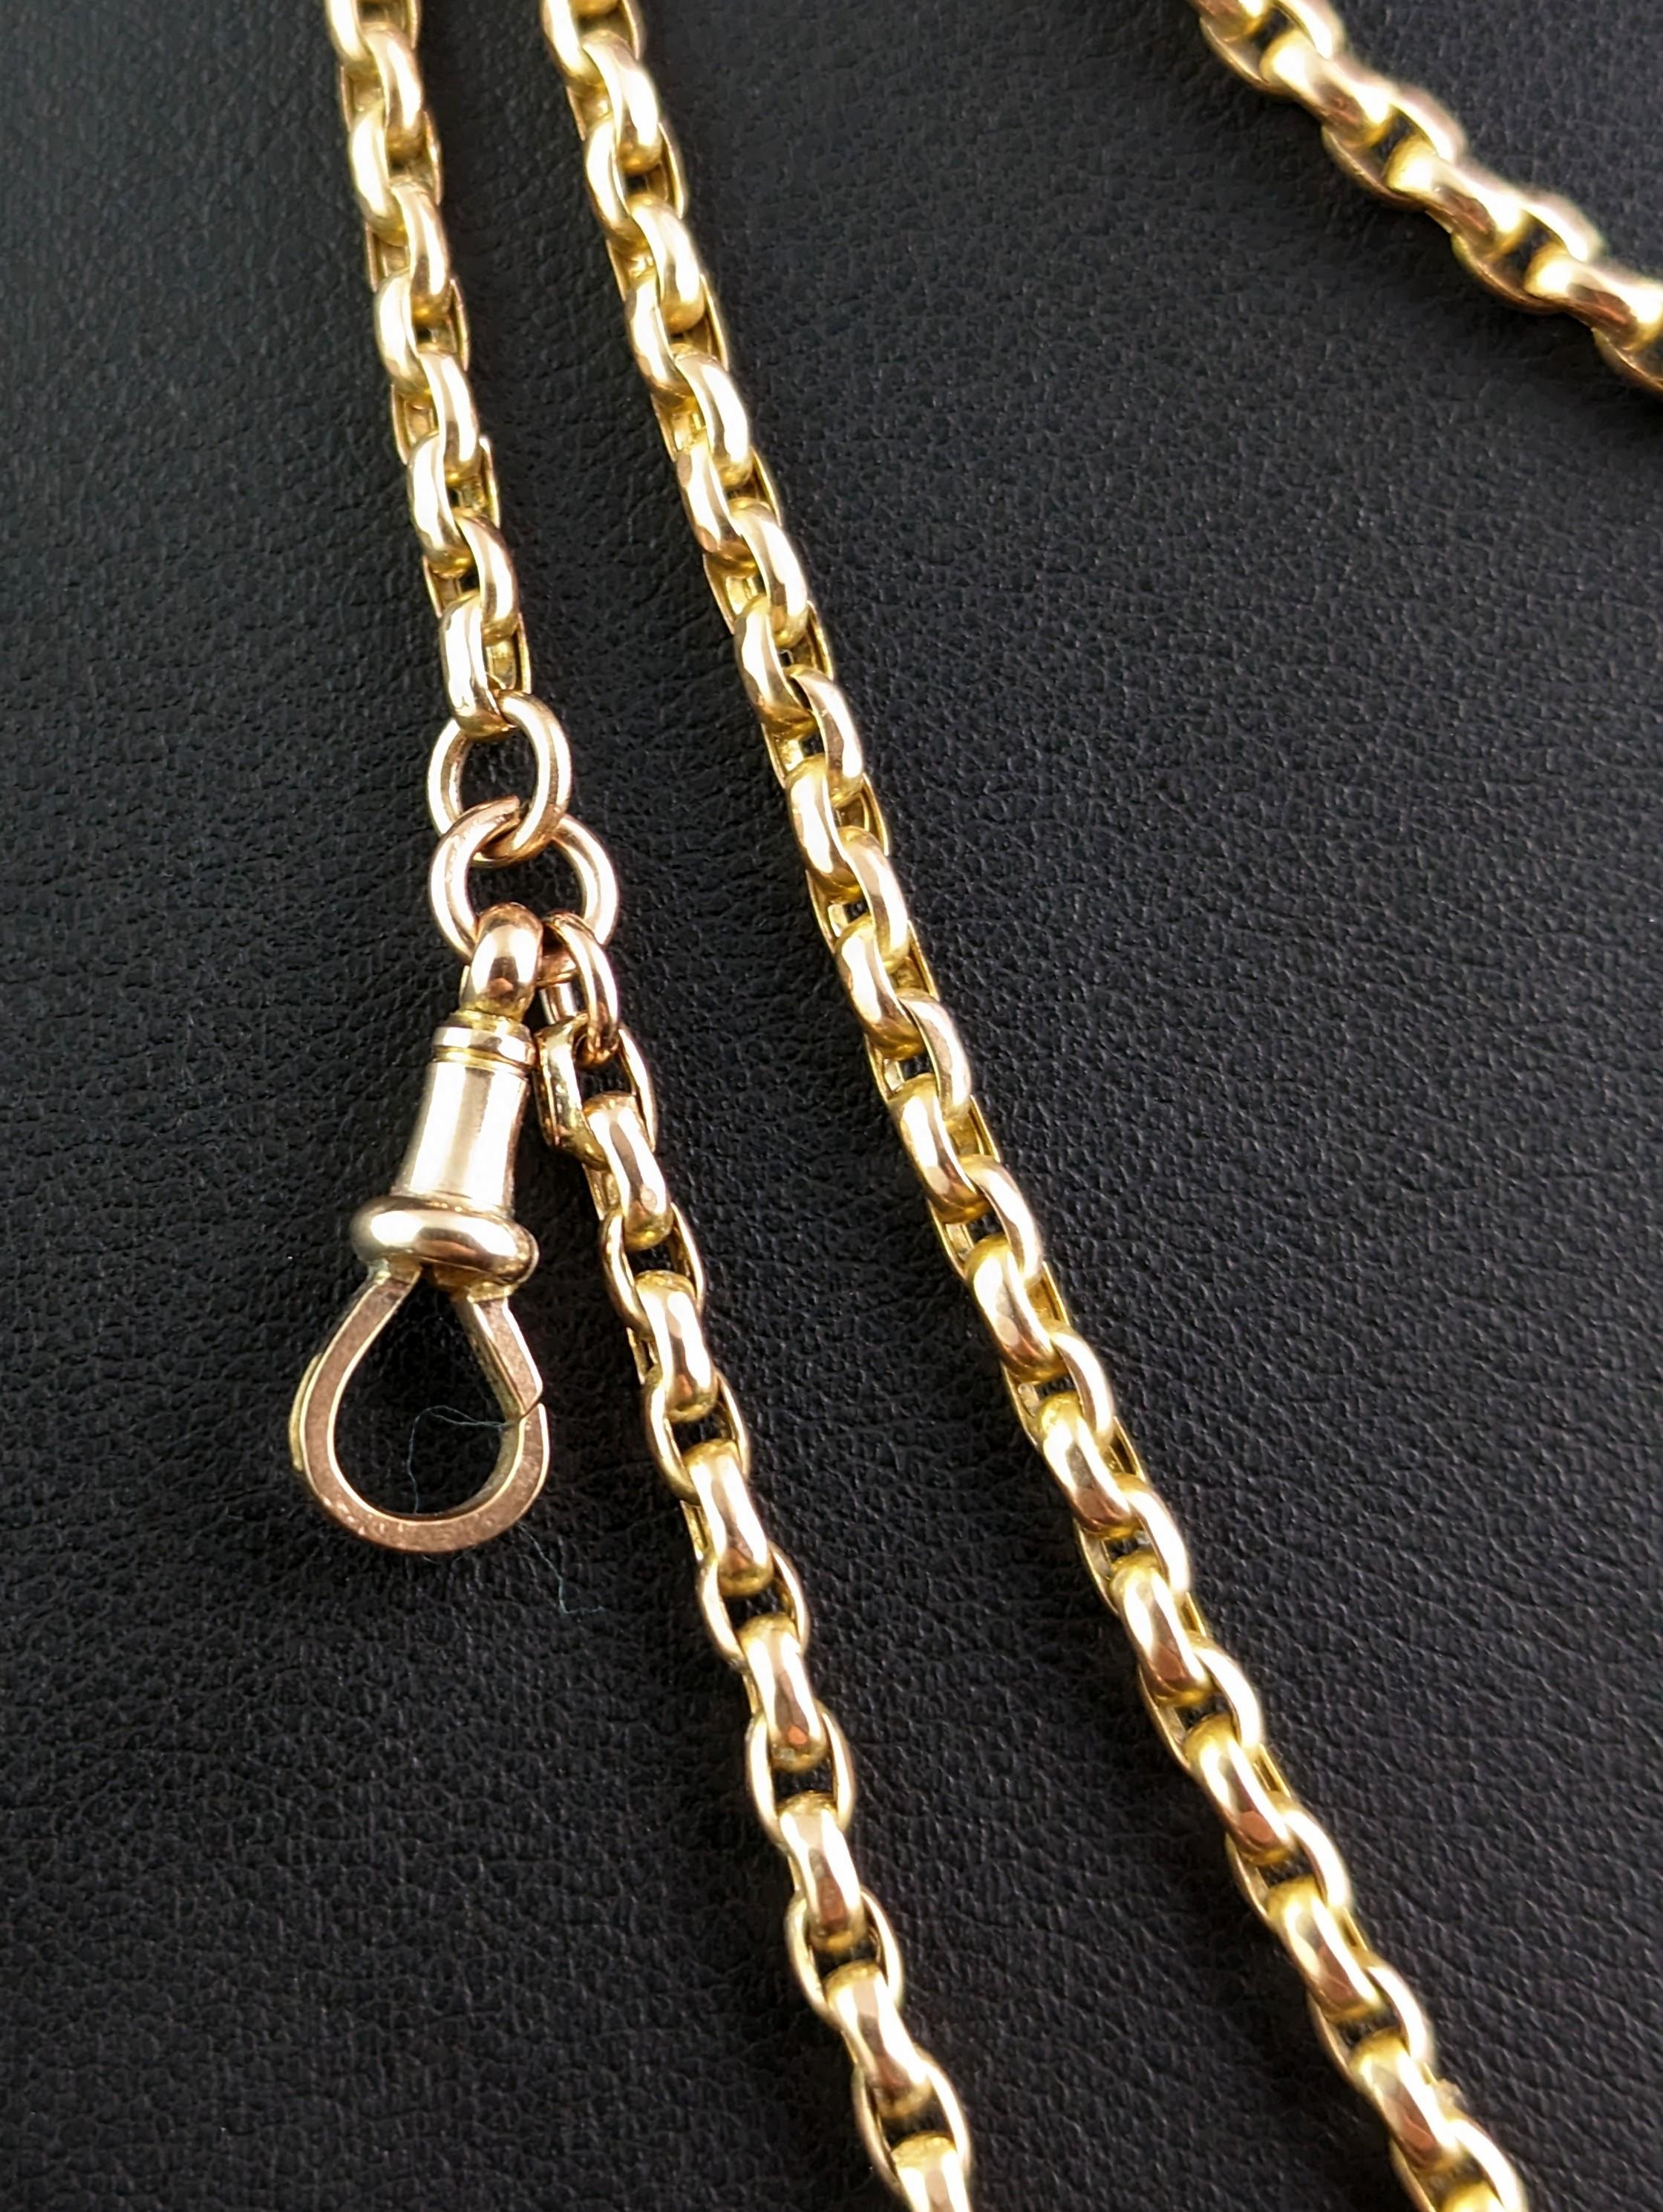 Antique 9k Yellow Gold Long Chain Necklace, Longuard, Victorian For Sale 6